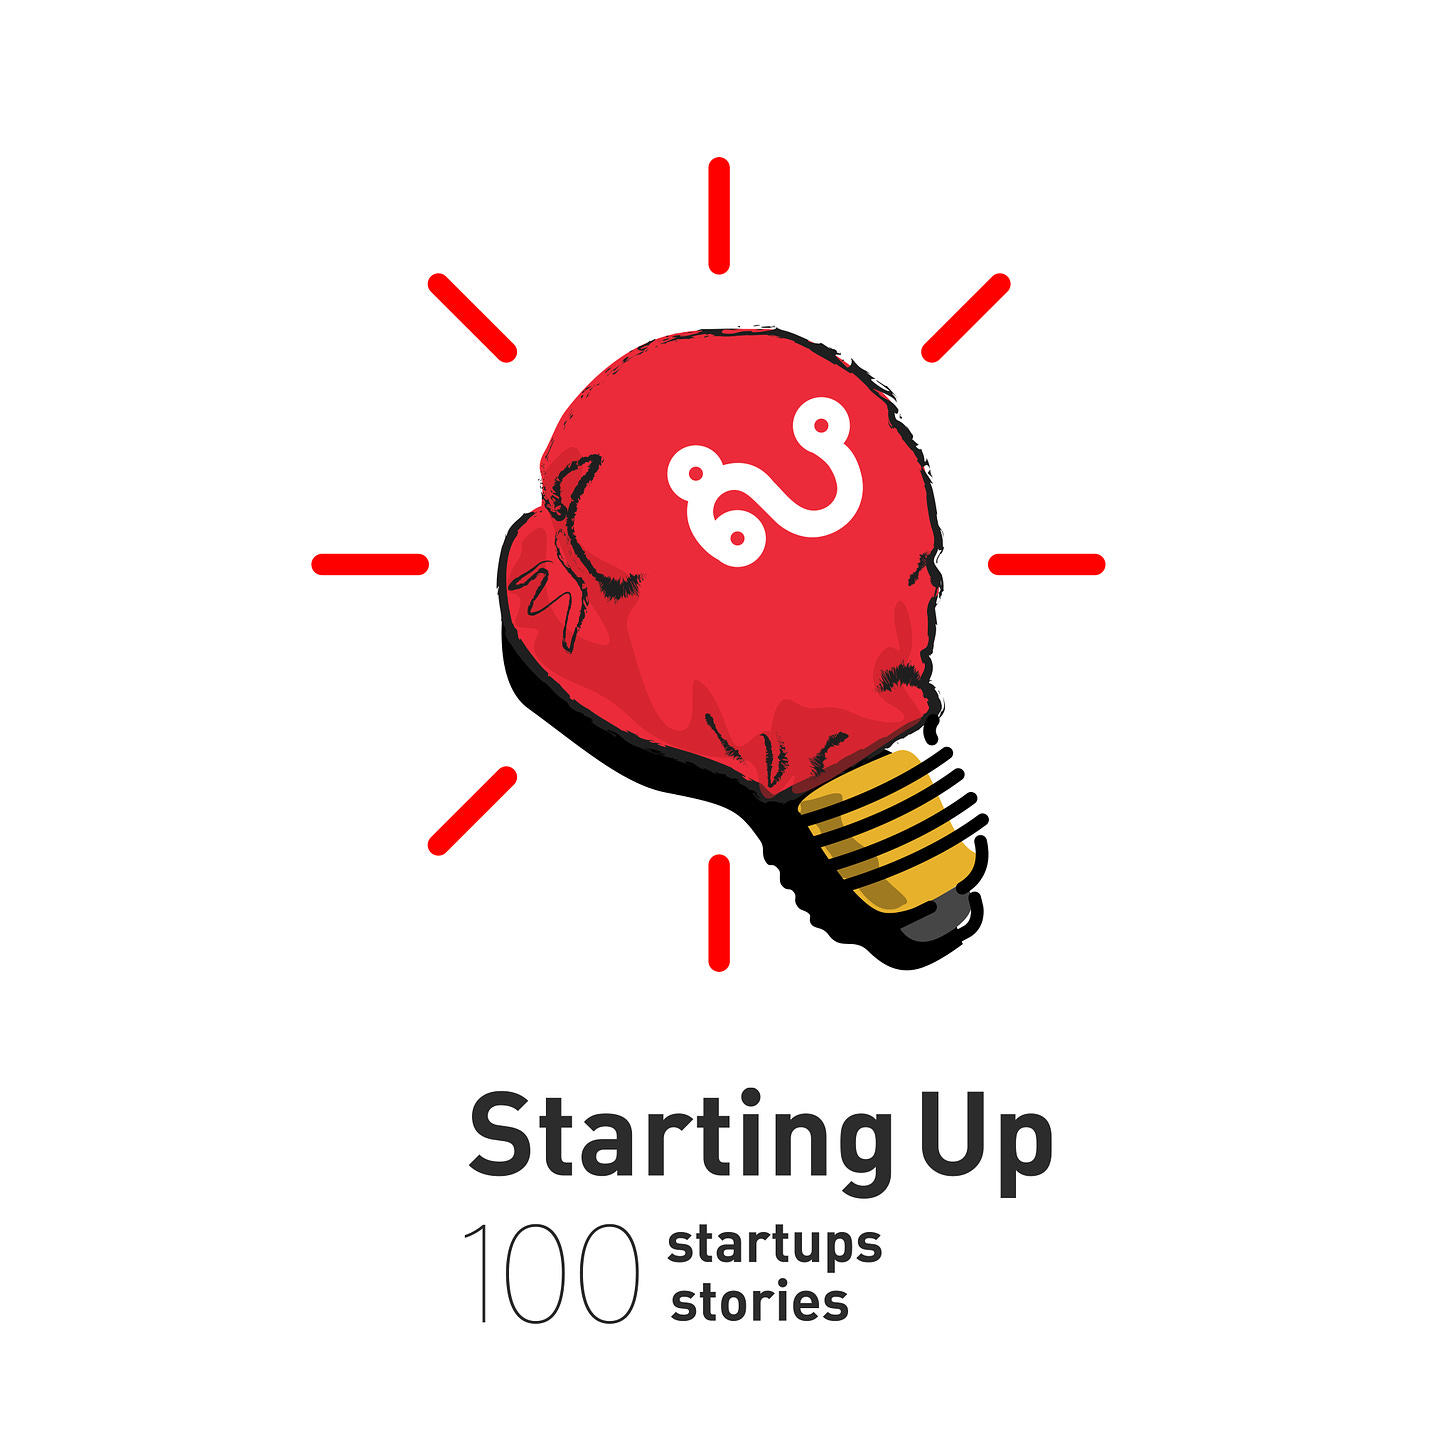 May be an image of text that says 'ស Starting Up 100 stories startups'